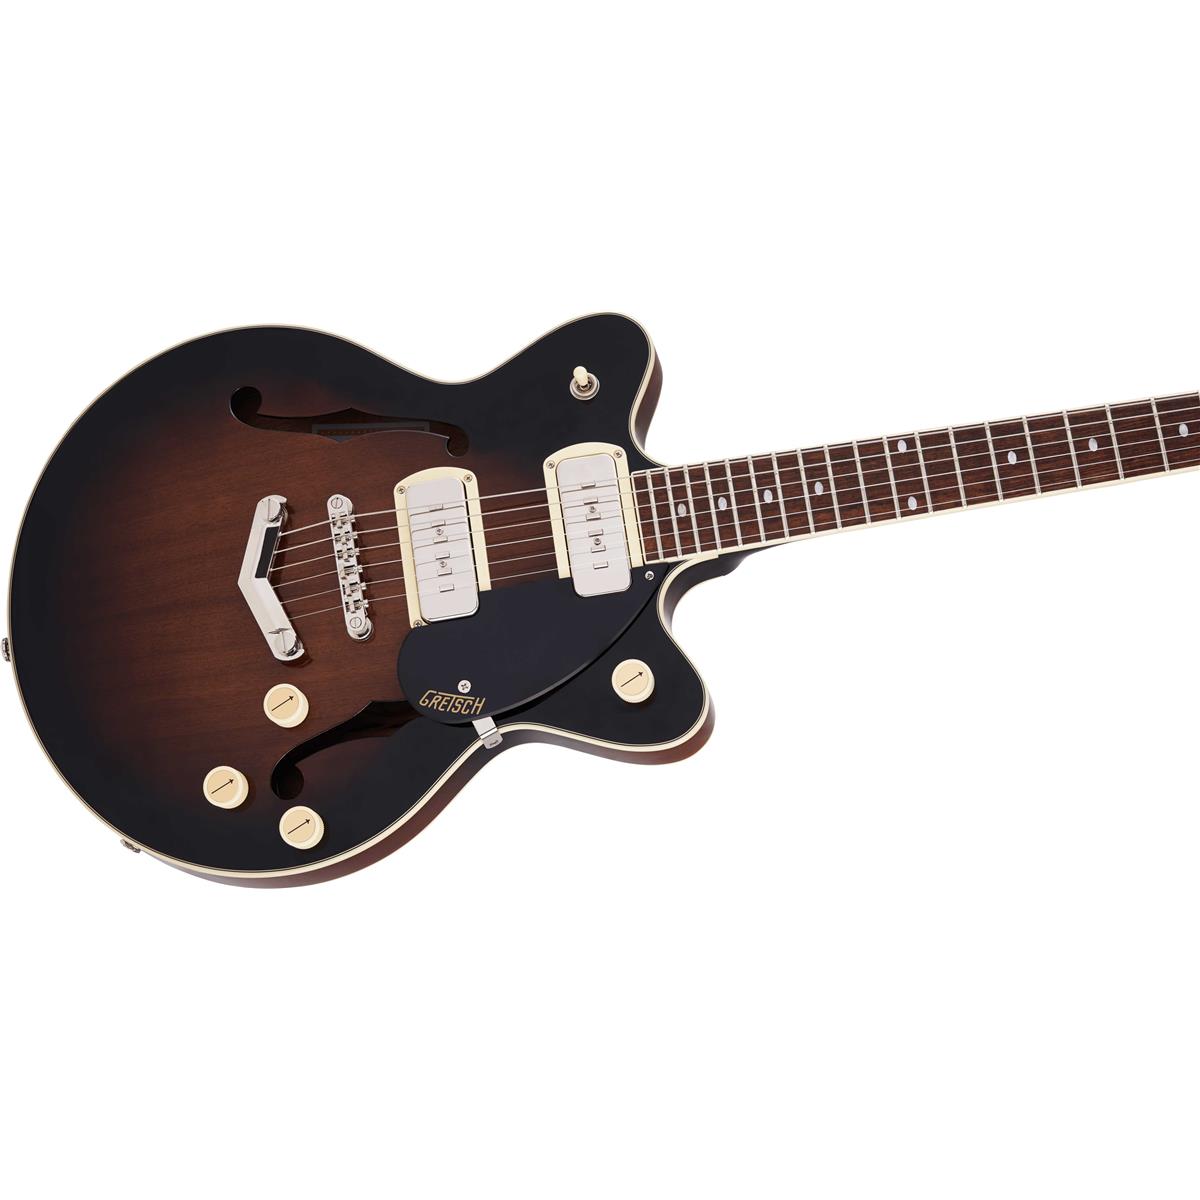 Gretsch G2655-P90 Center Block Jr. Double-Cut P90 Electric Guitar w/ V-Stoptail $249 + free s/h